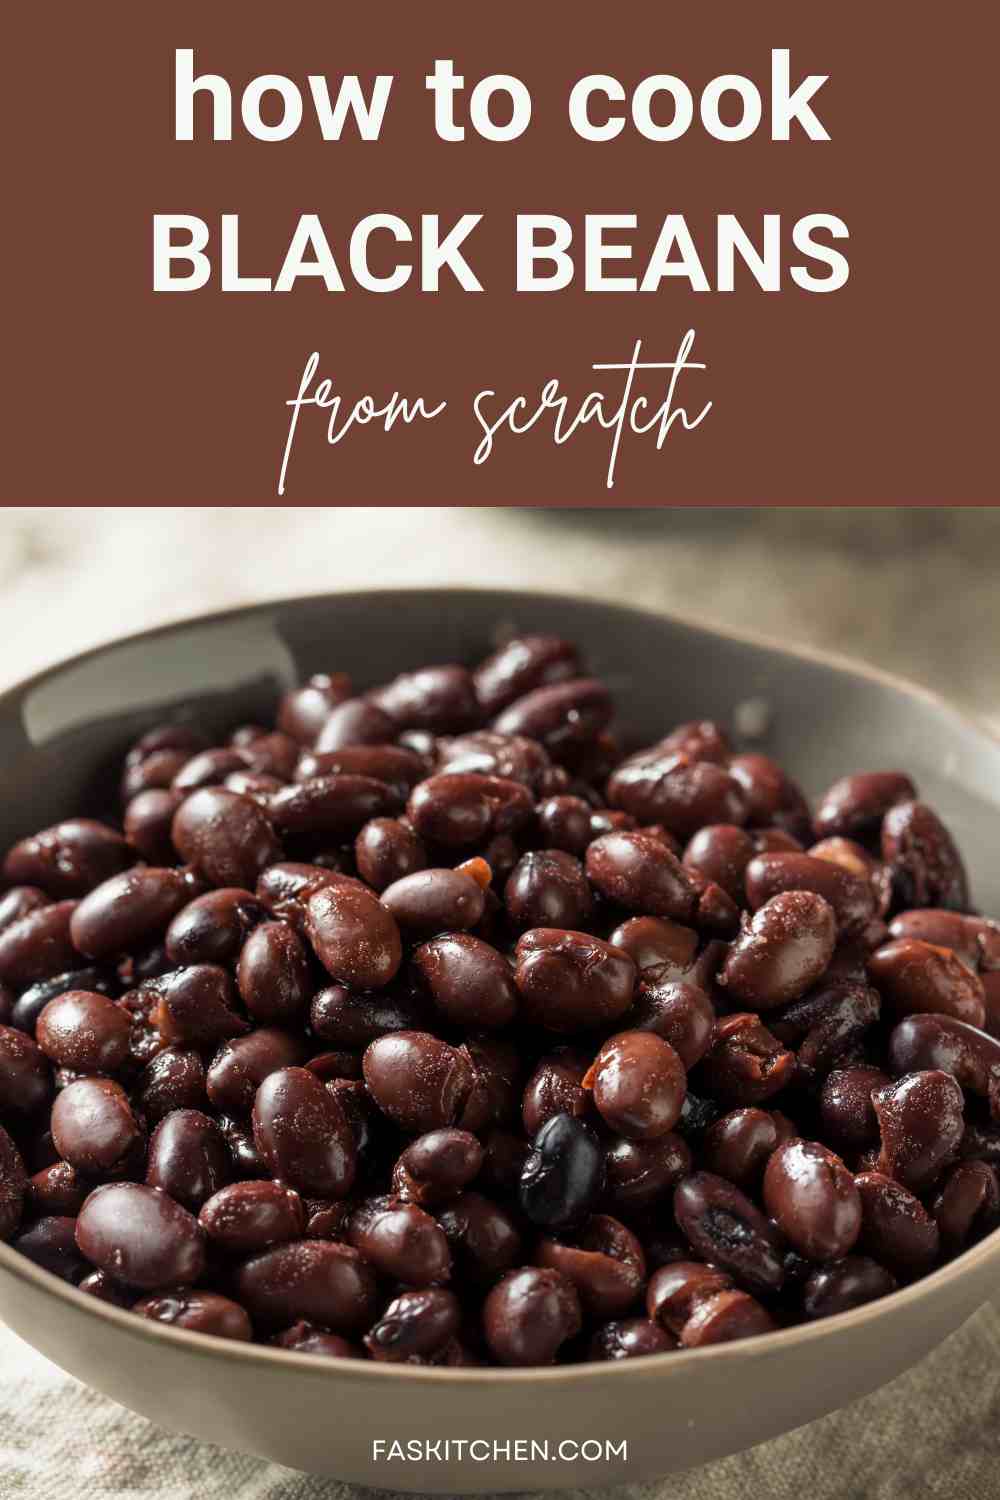 Black beans cooking